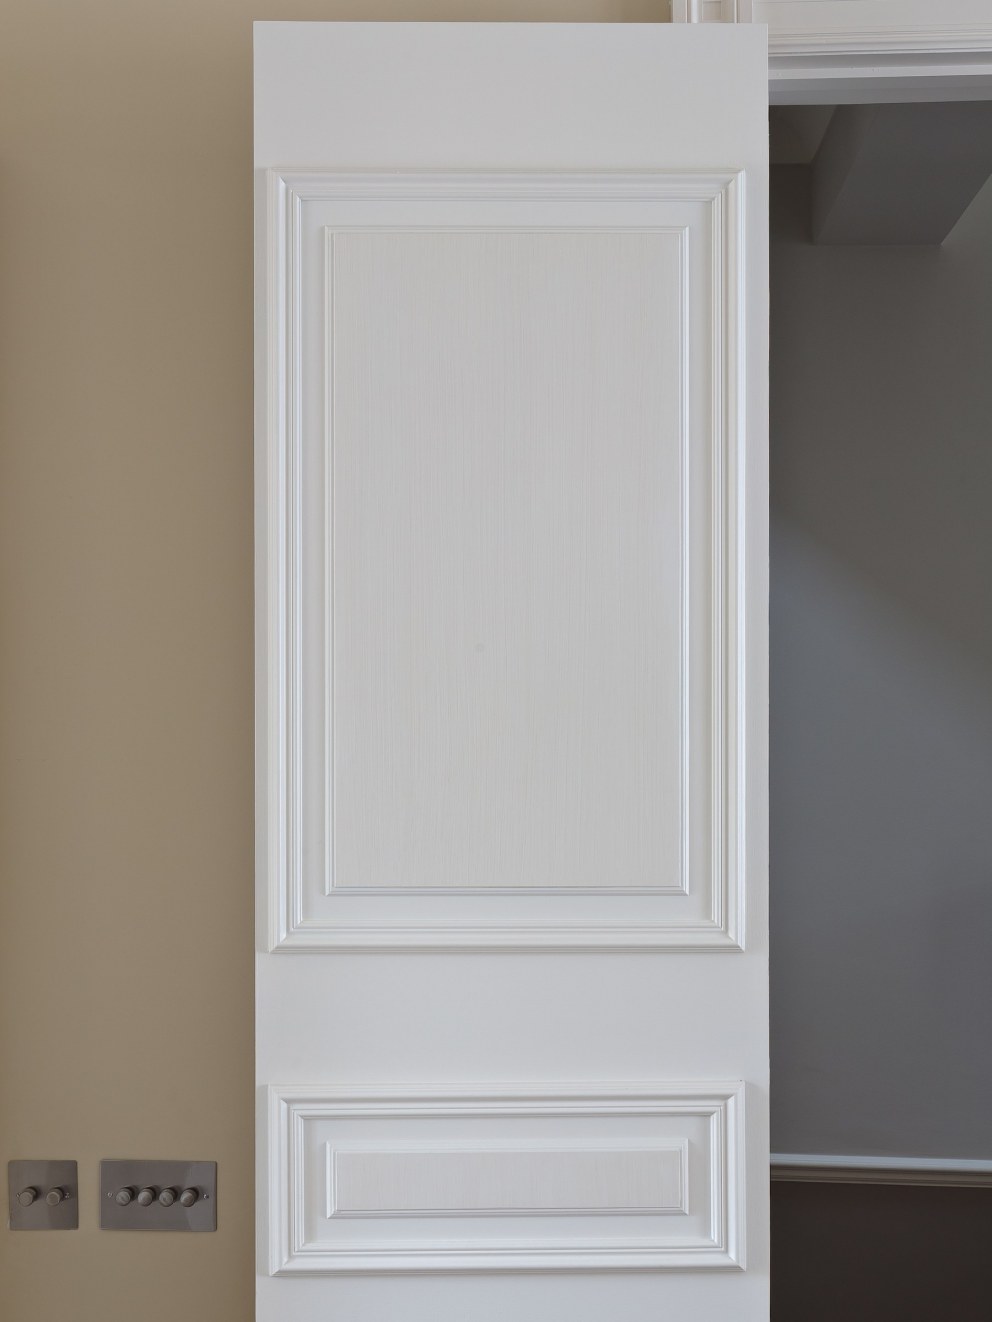 Family Home East London | Joinery door detail | Interior Designers